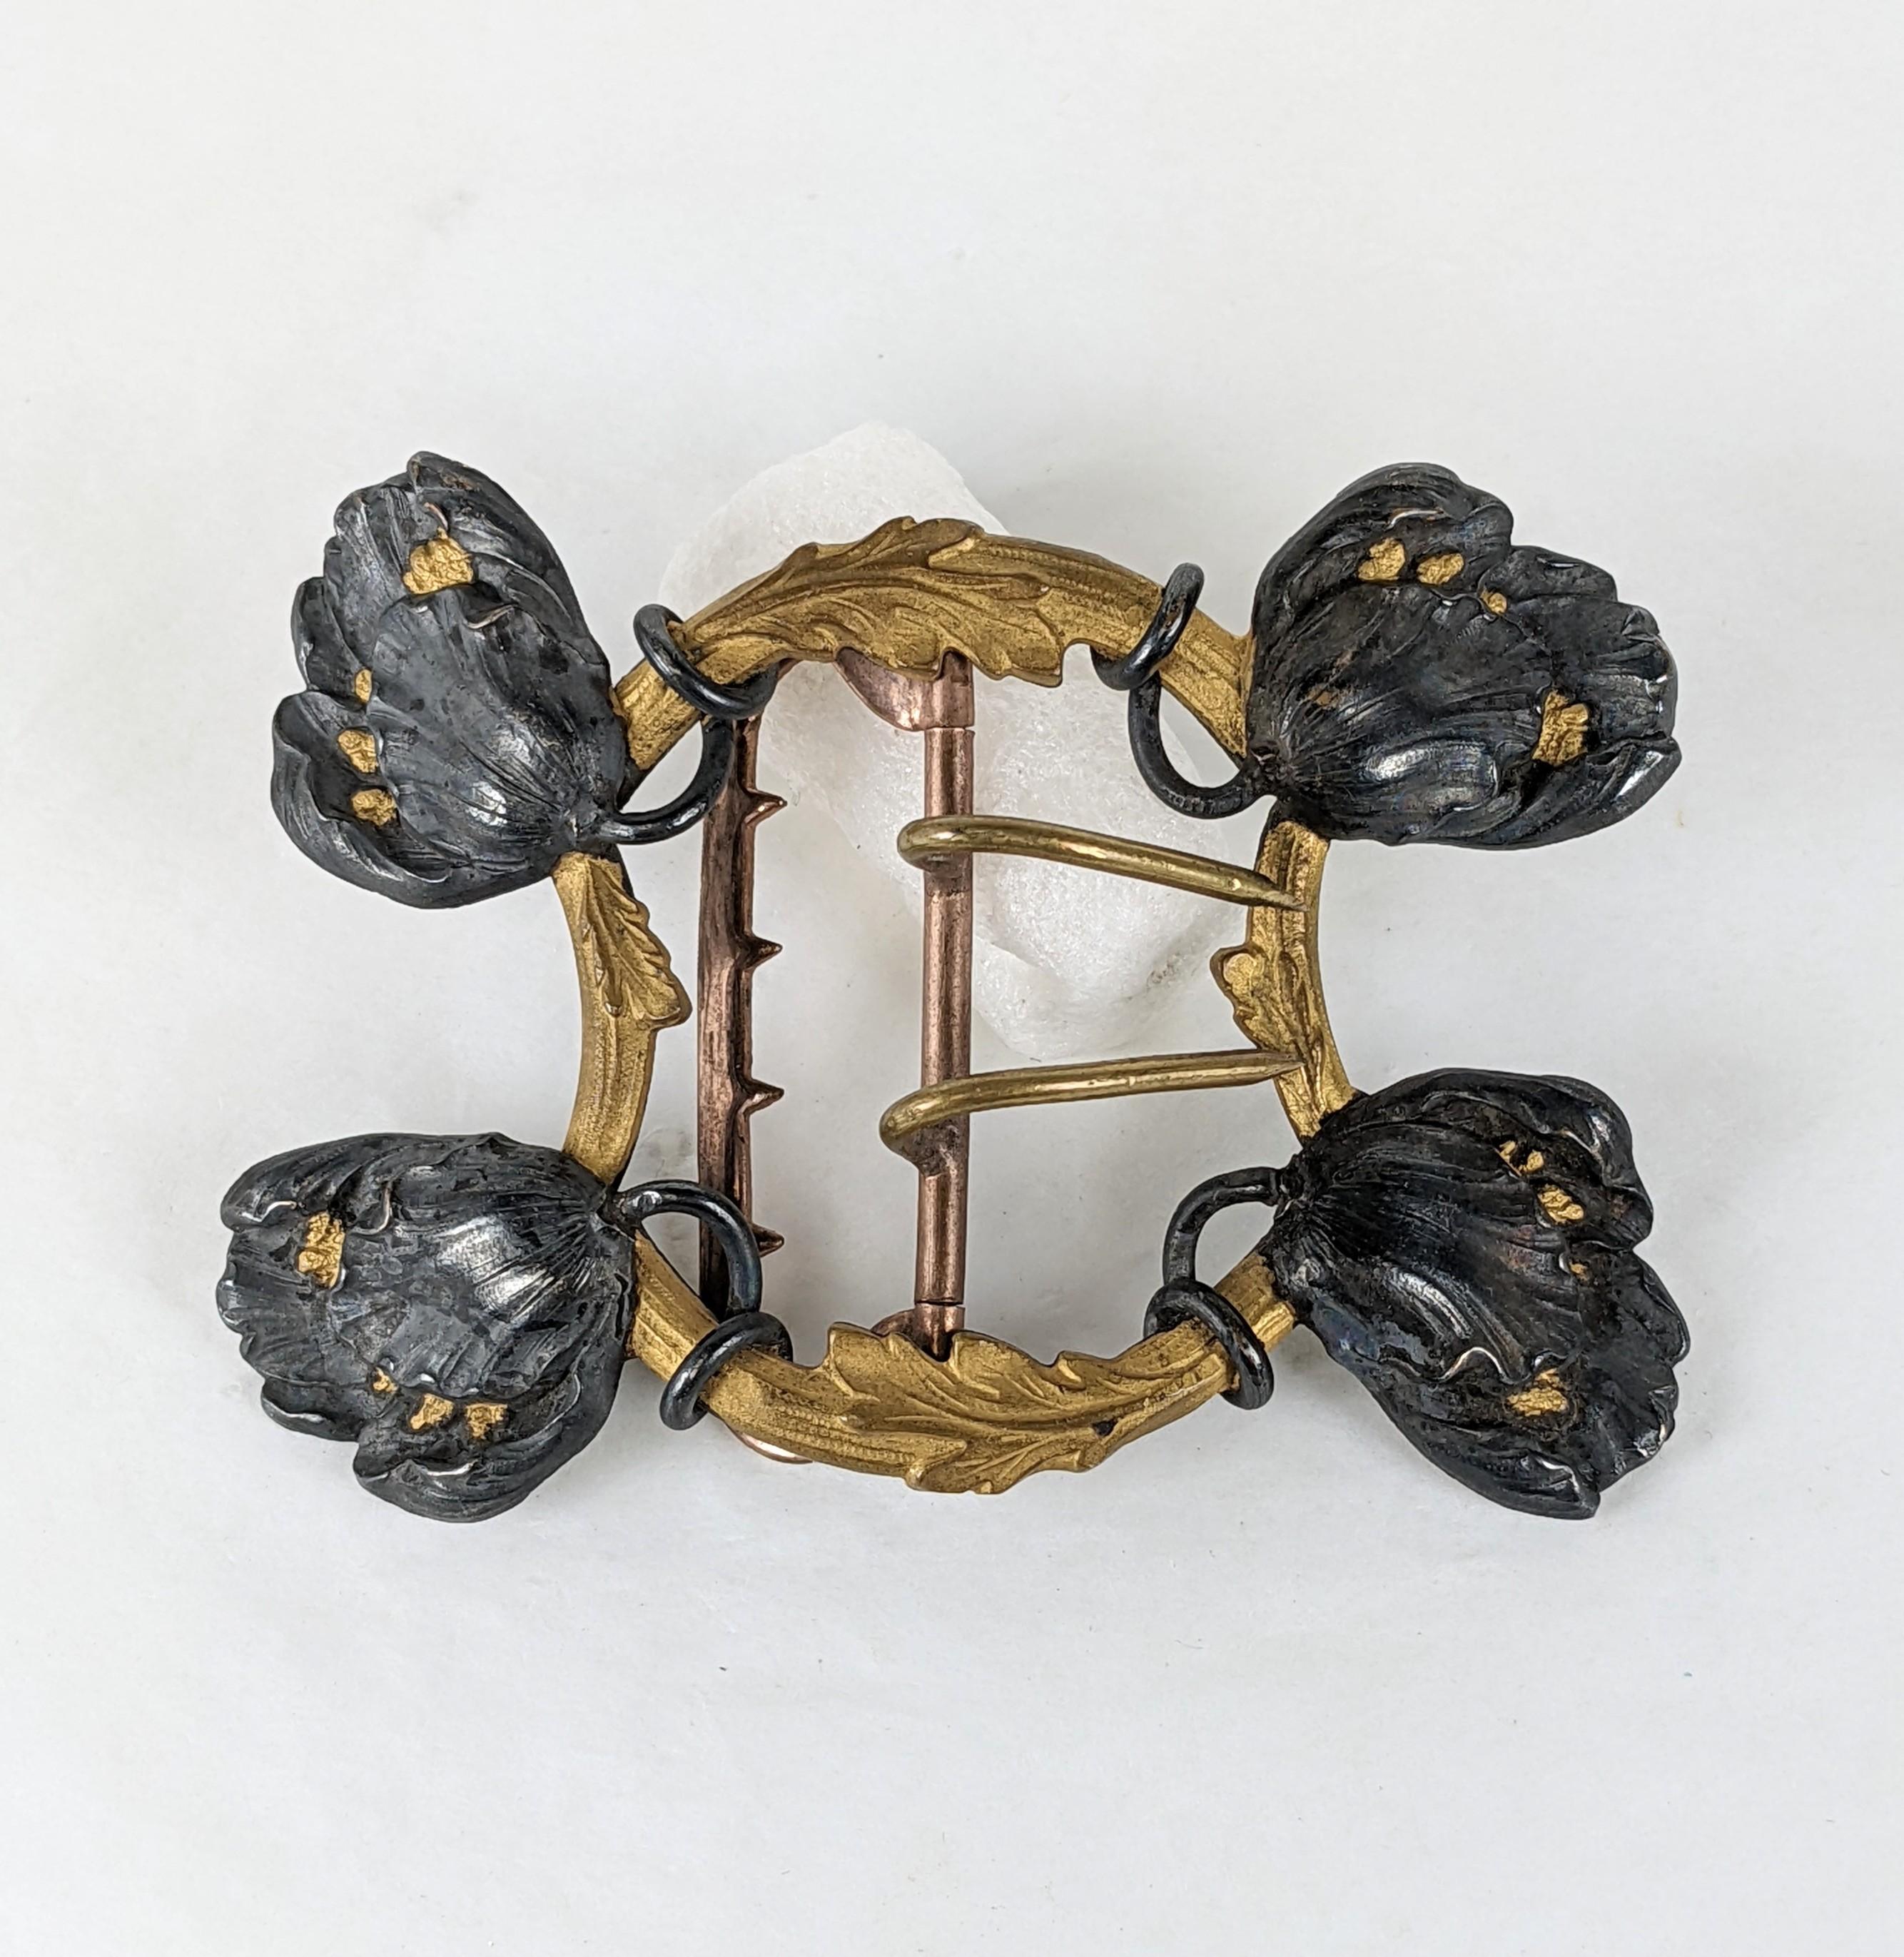 Piel Frères Art Nouveau double prong buckle circa 1900. Of rich matte gilt bronze foliage and japanned silver plated blooming poppies with matte gilt detailed pistons. Gold plate buckle fittings.
Excellent Condition.  Unsigned.  L 3 1/8